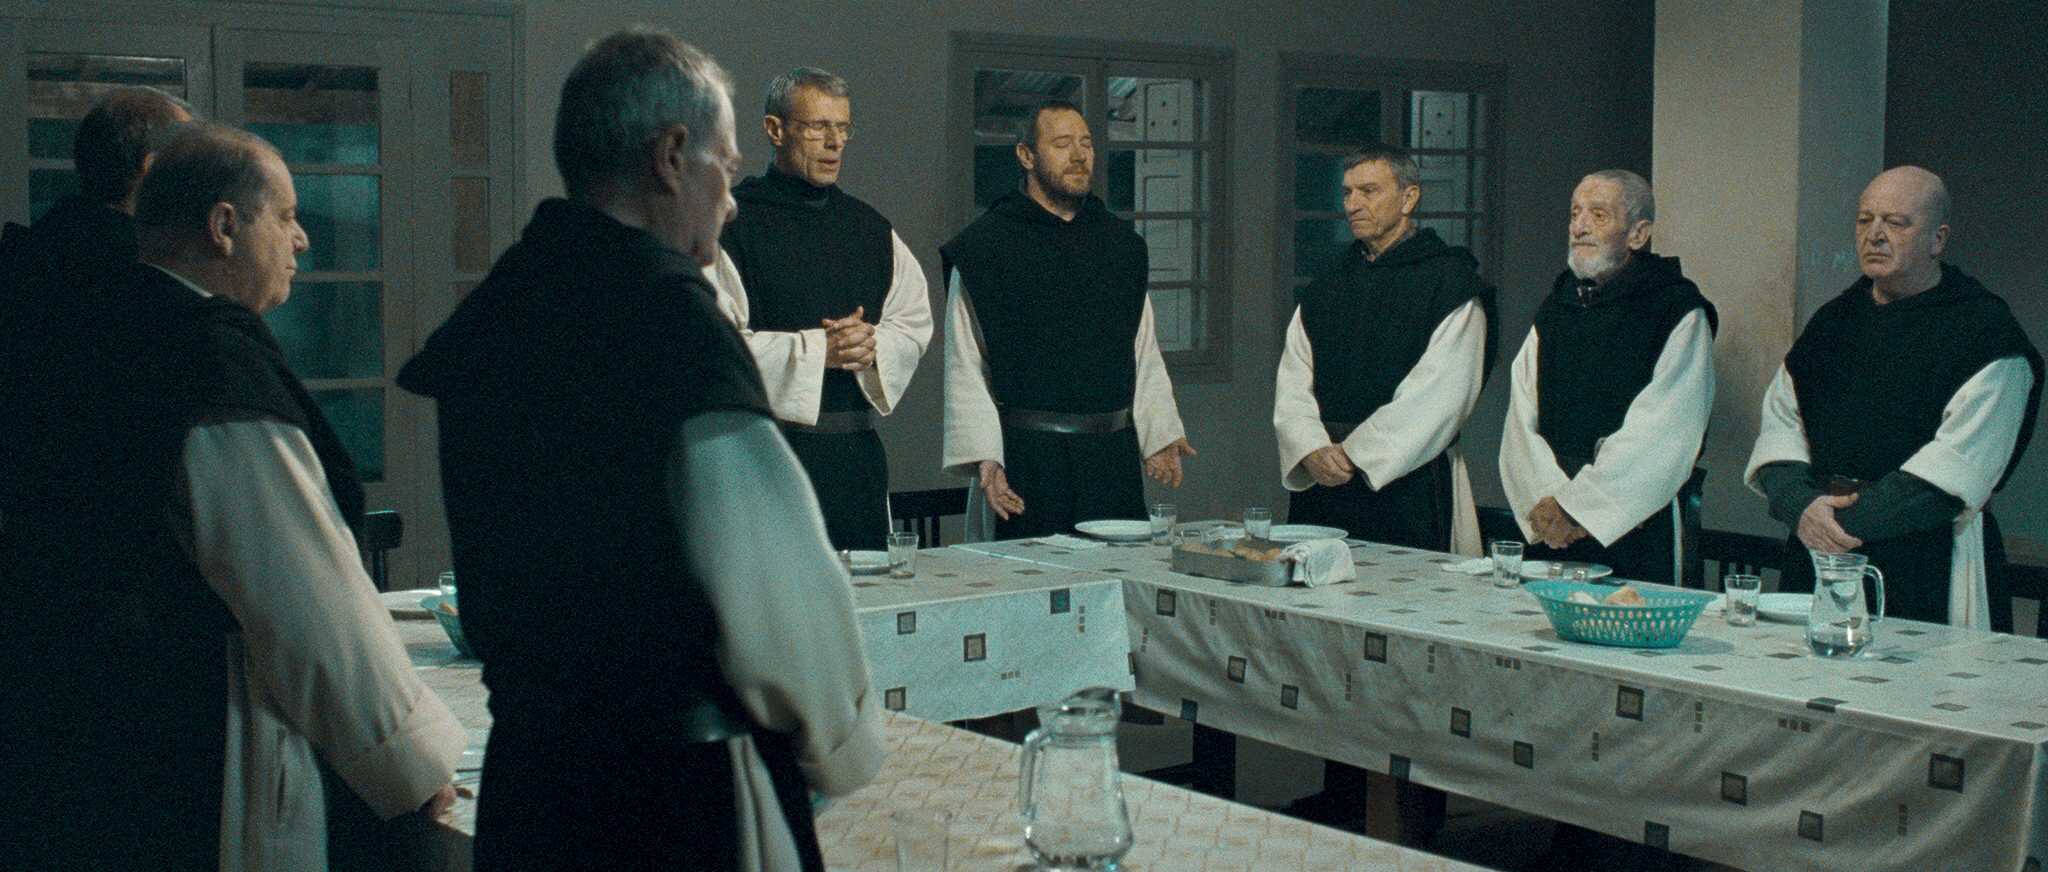 Of Gods and Men (2010)